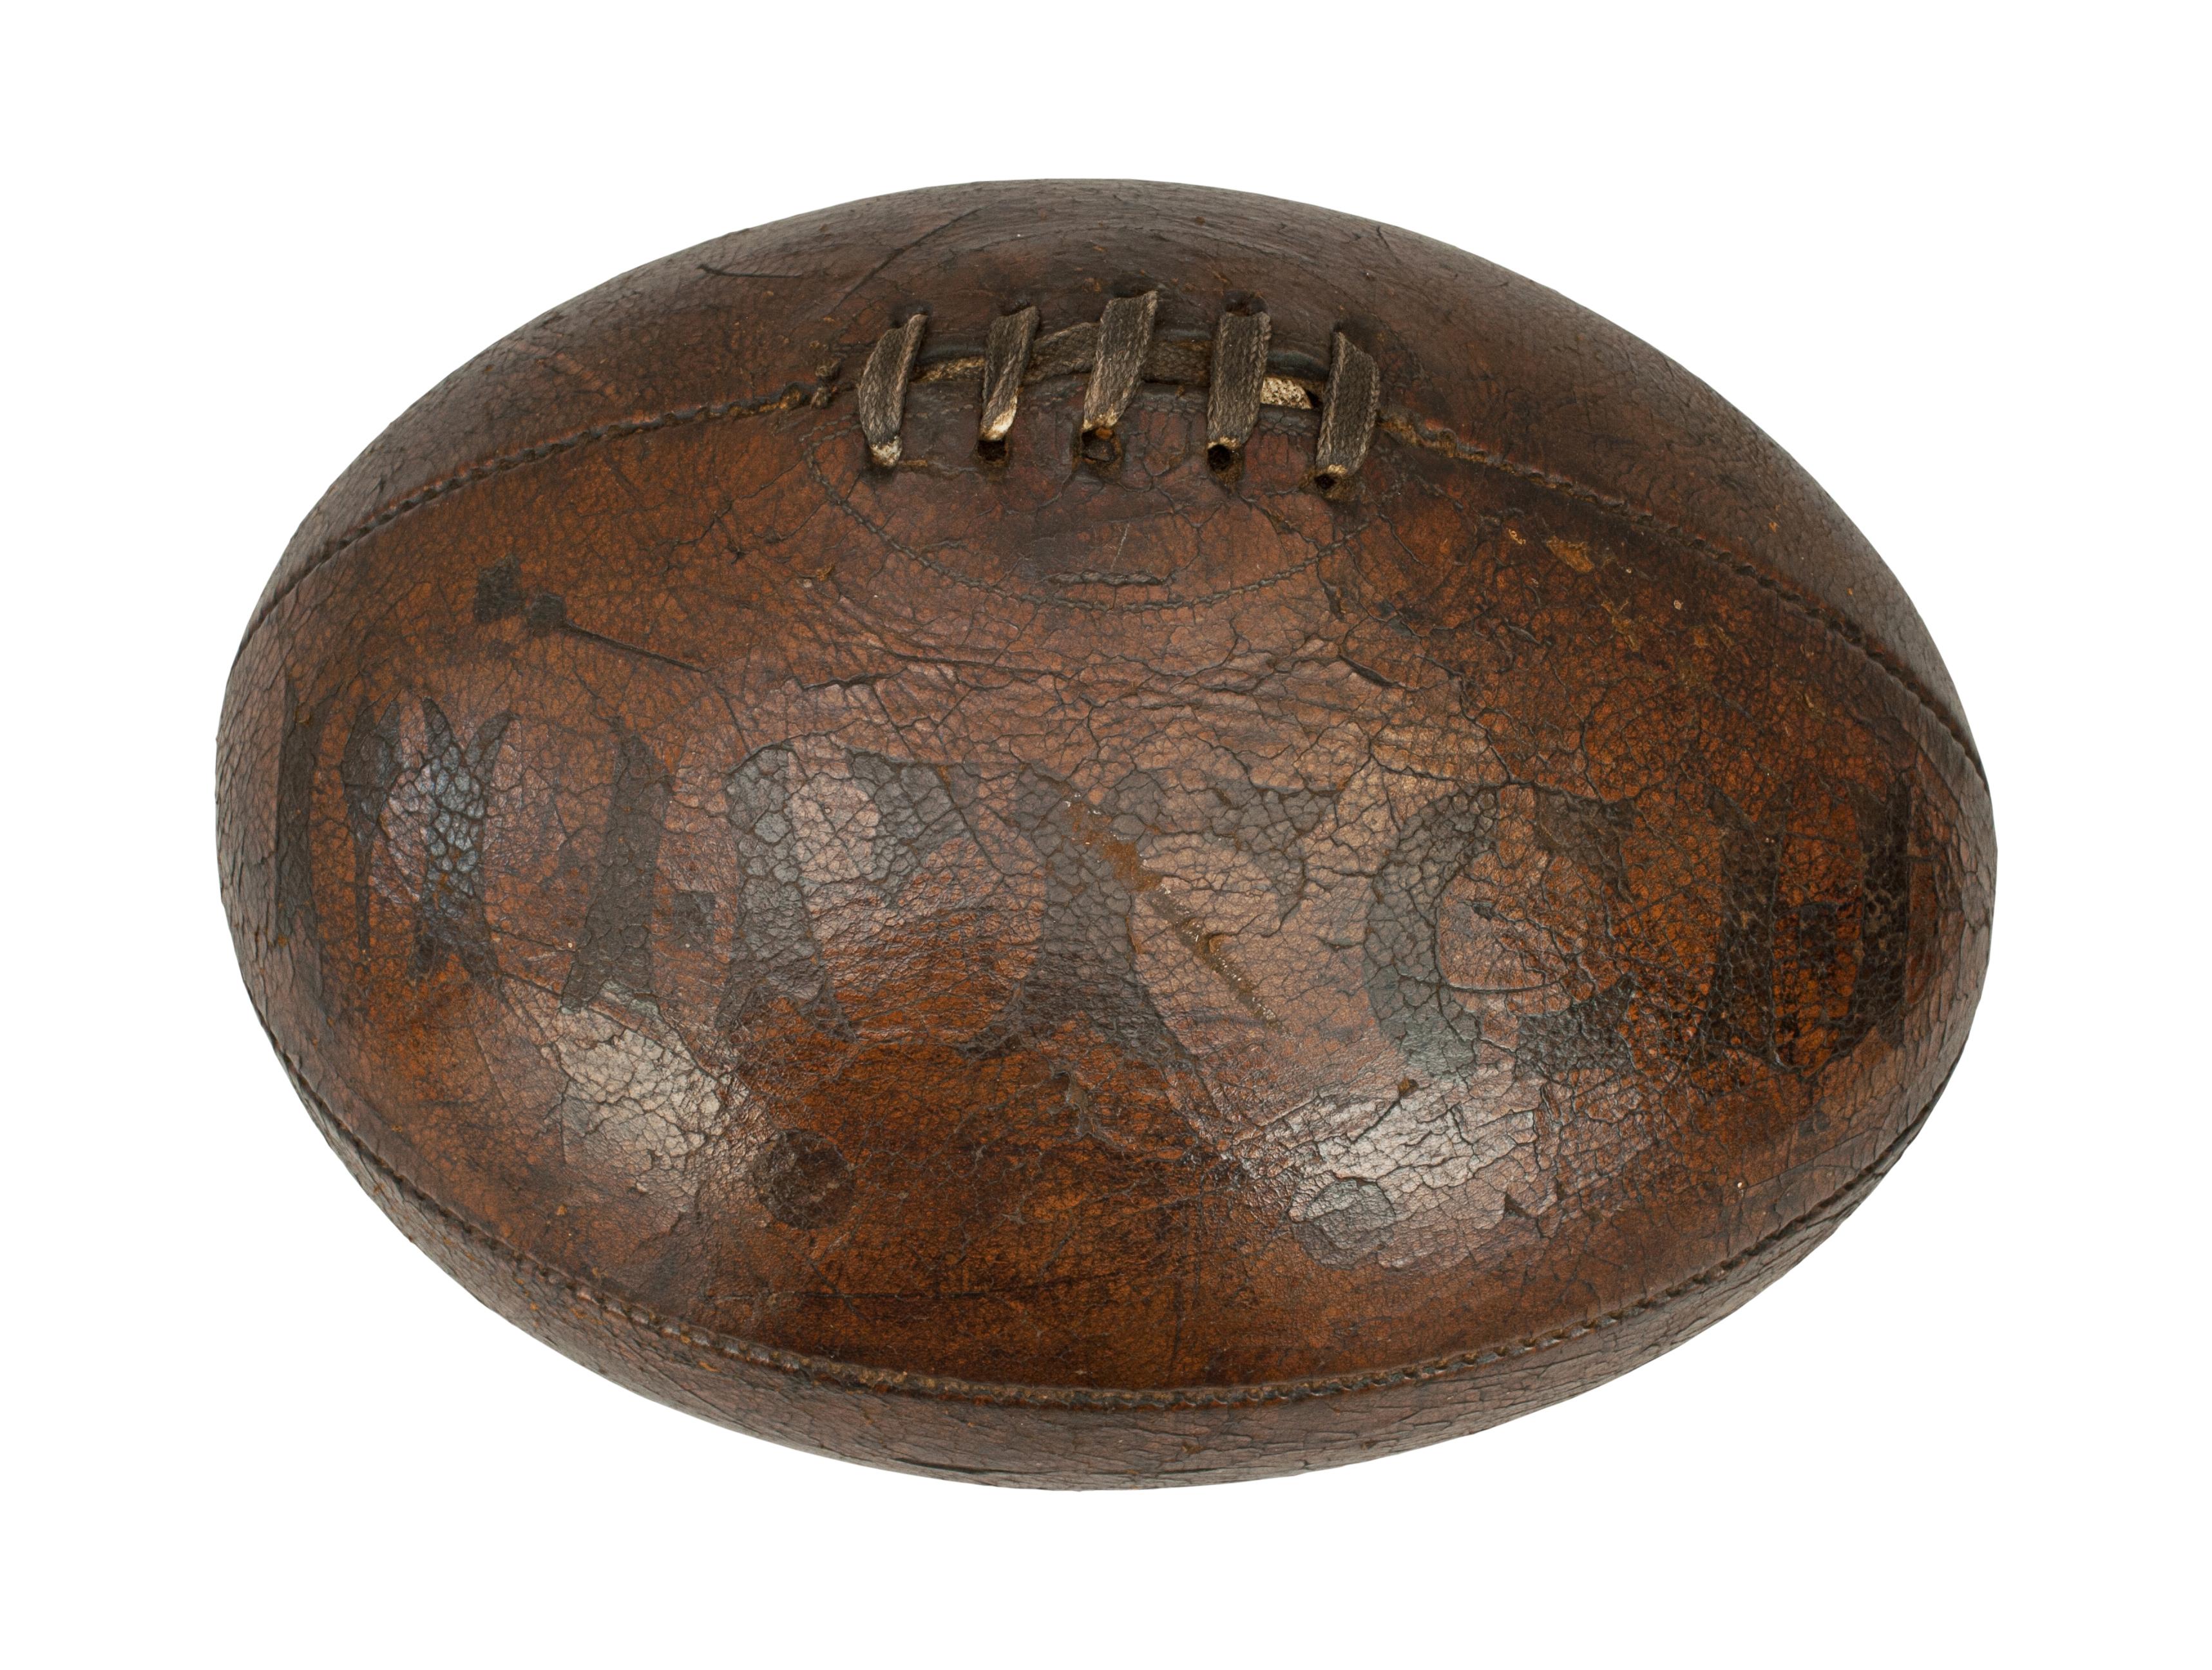 Match leather rugby ball, football.
A very nice, early shaped leather rugby ball with match stencil on one of the panels. The ball is made up of four leather panels and has a lace-up slit to the top to enable bladder inflation.